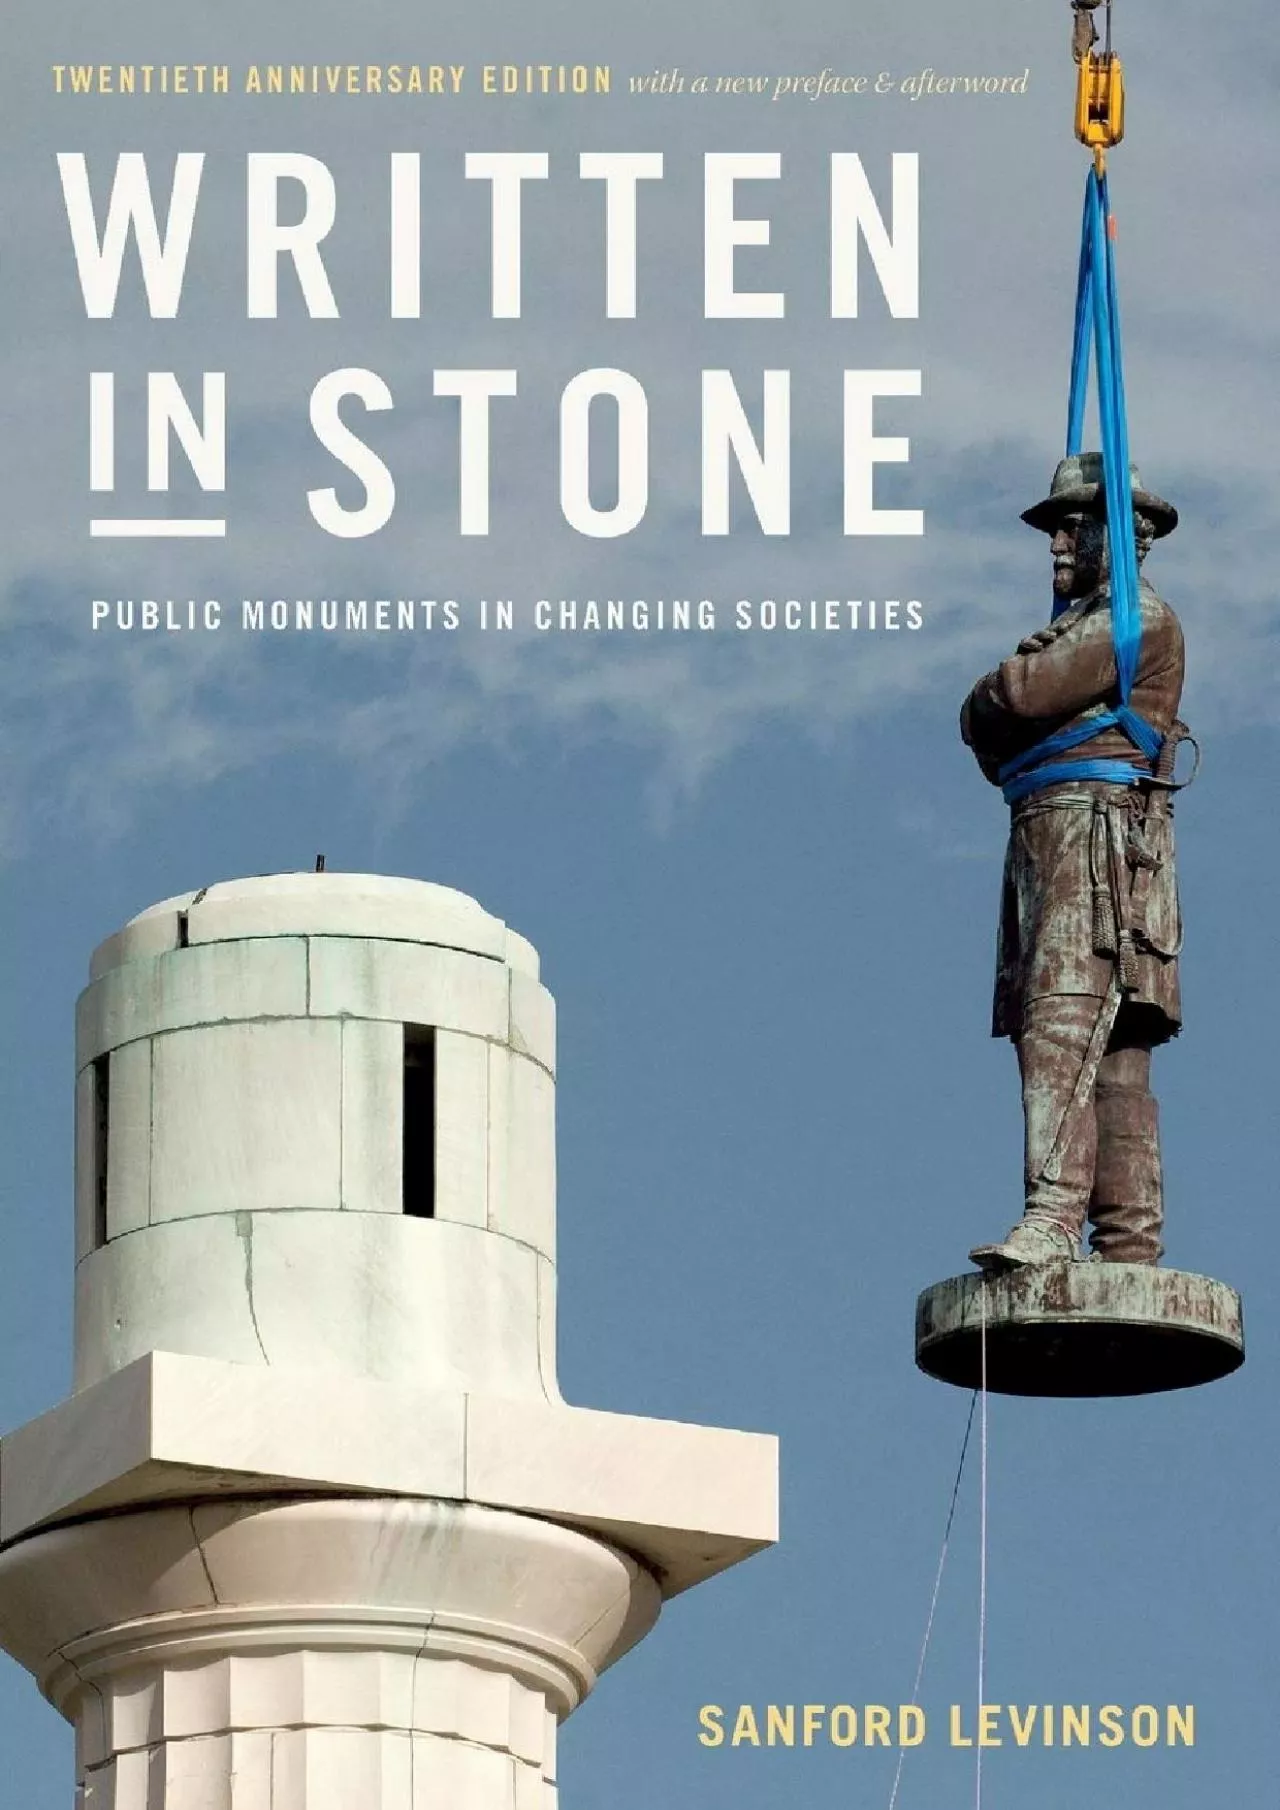 (BOOS)-Written in Stone: Public Monuments in Changing Societies (Public Planet Books)